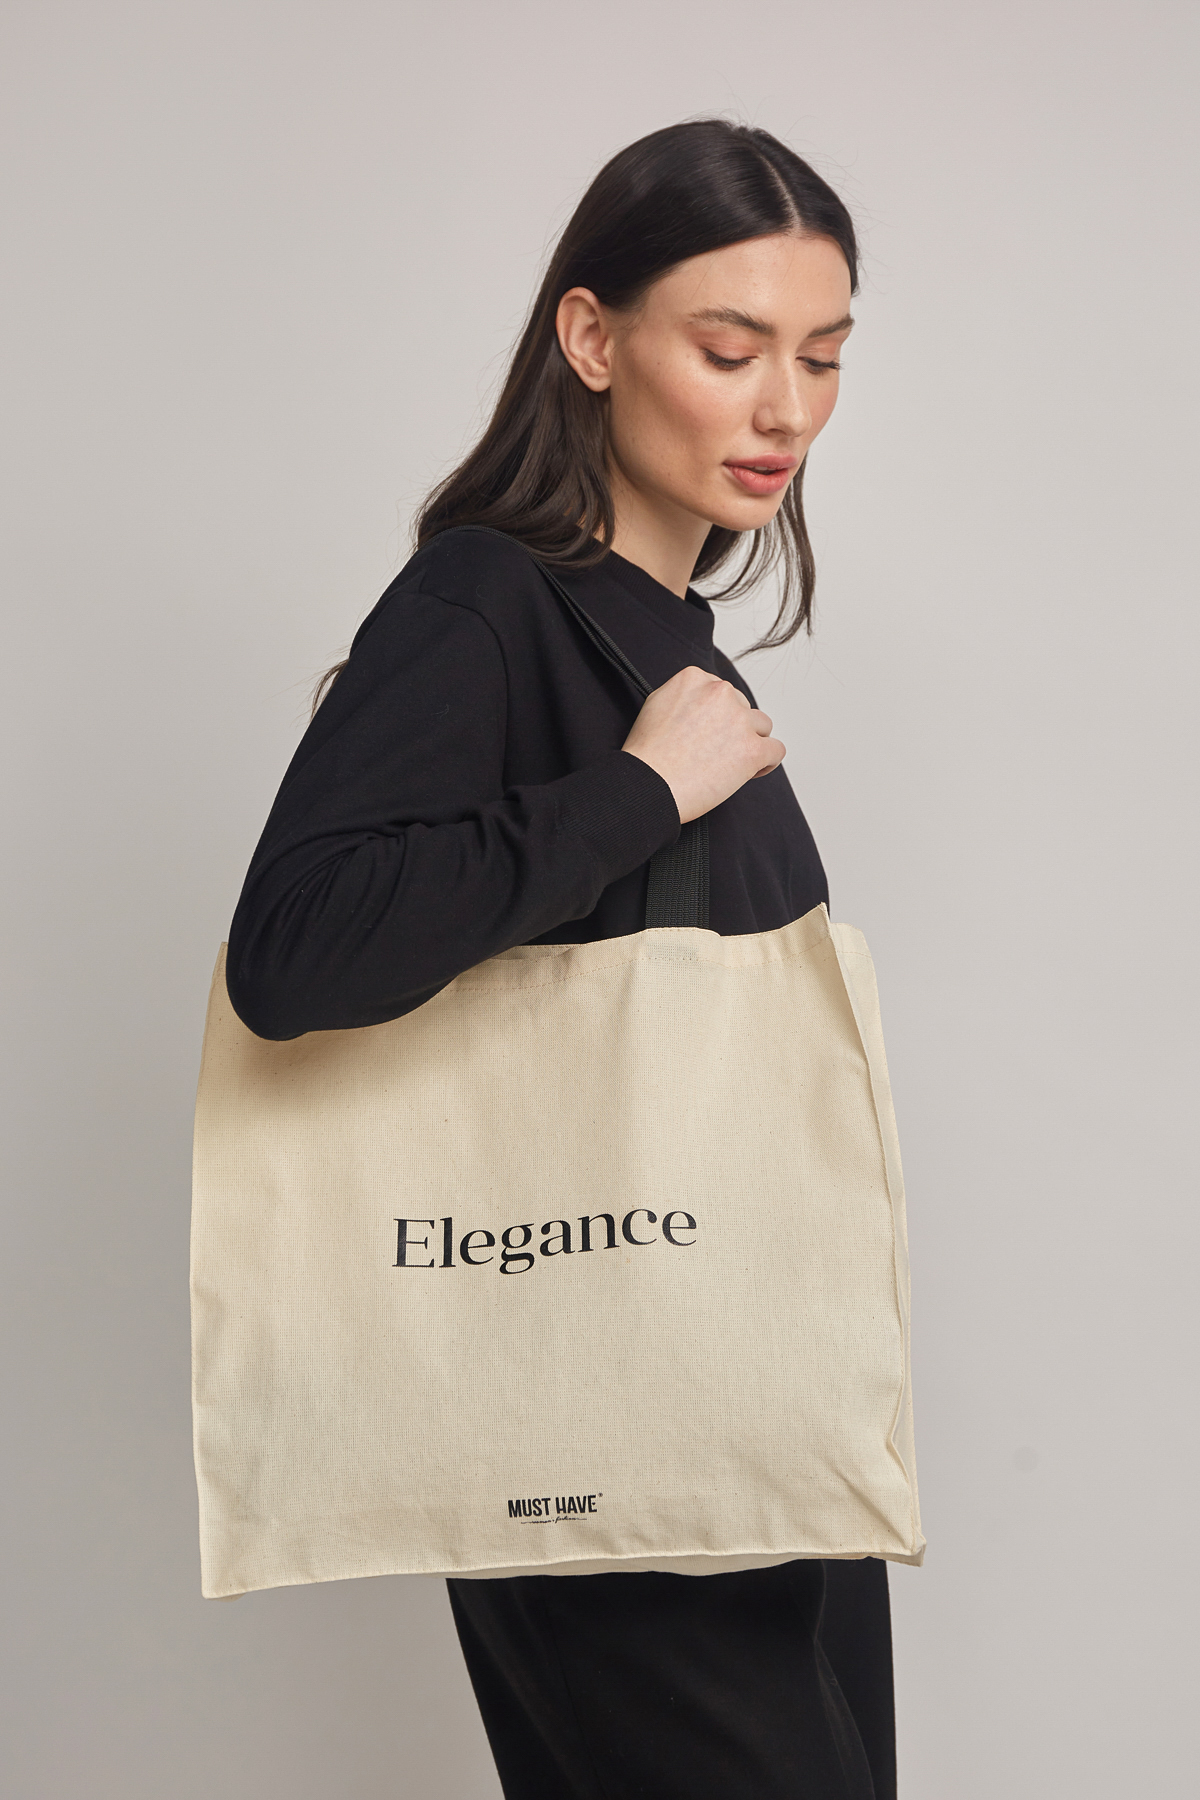 Large eco-bag with the inscription "Elegance", photo 3